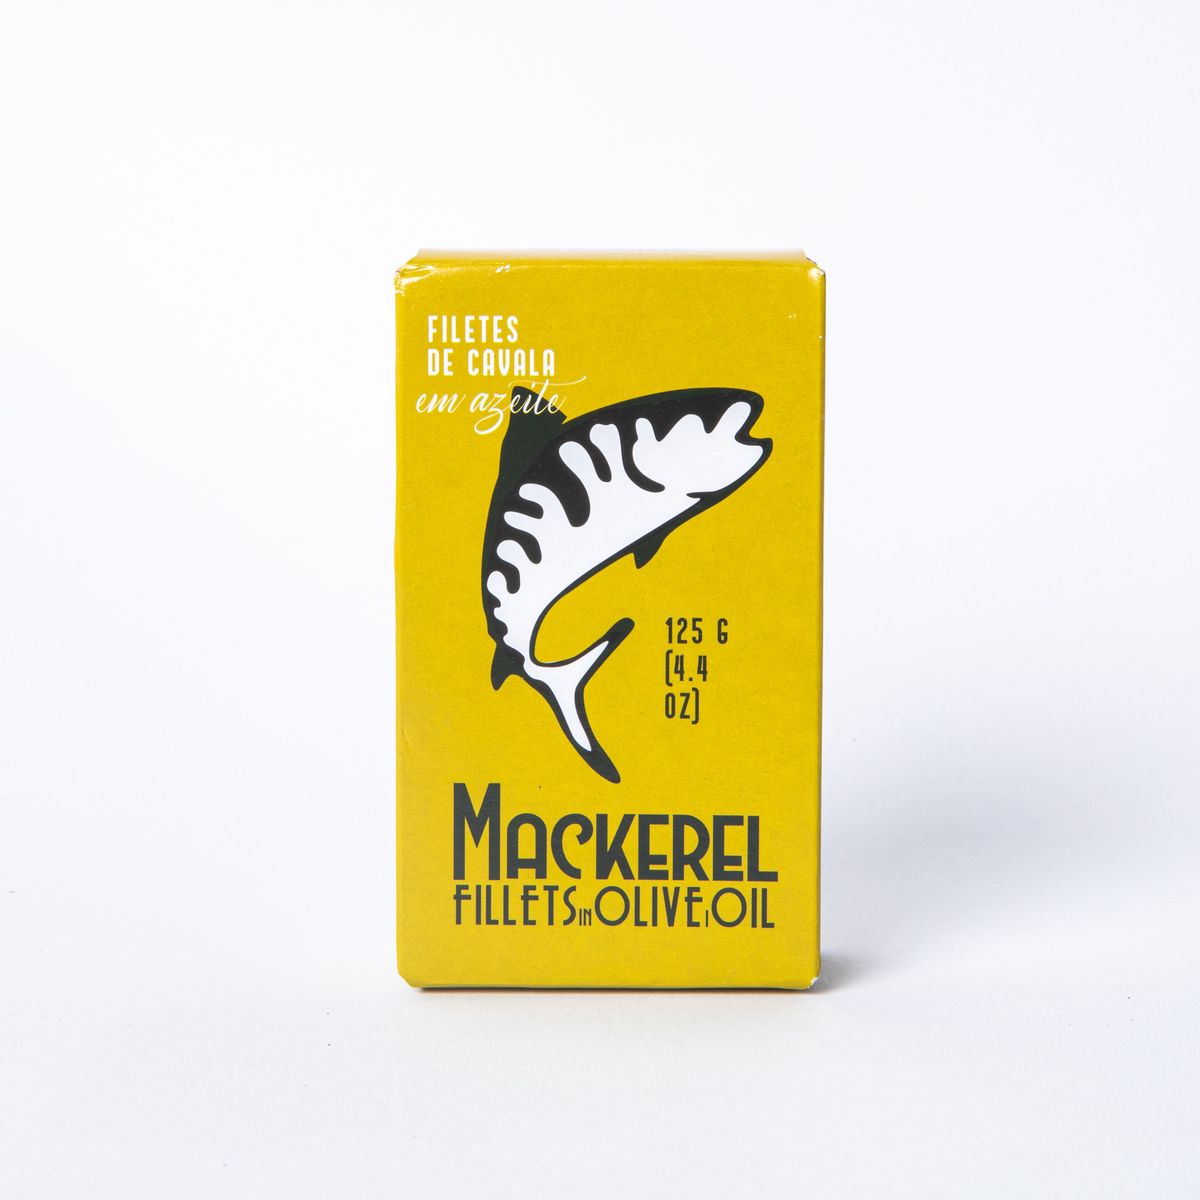 Yellow box with a fish illustration and text that reads: "Mackerel Fillets in Olive Oil"